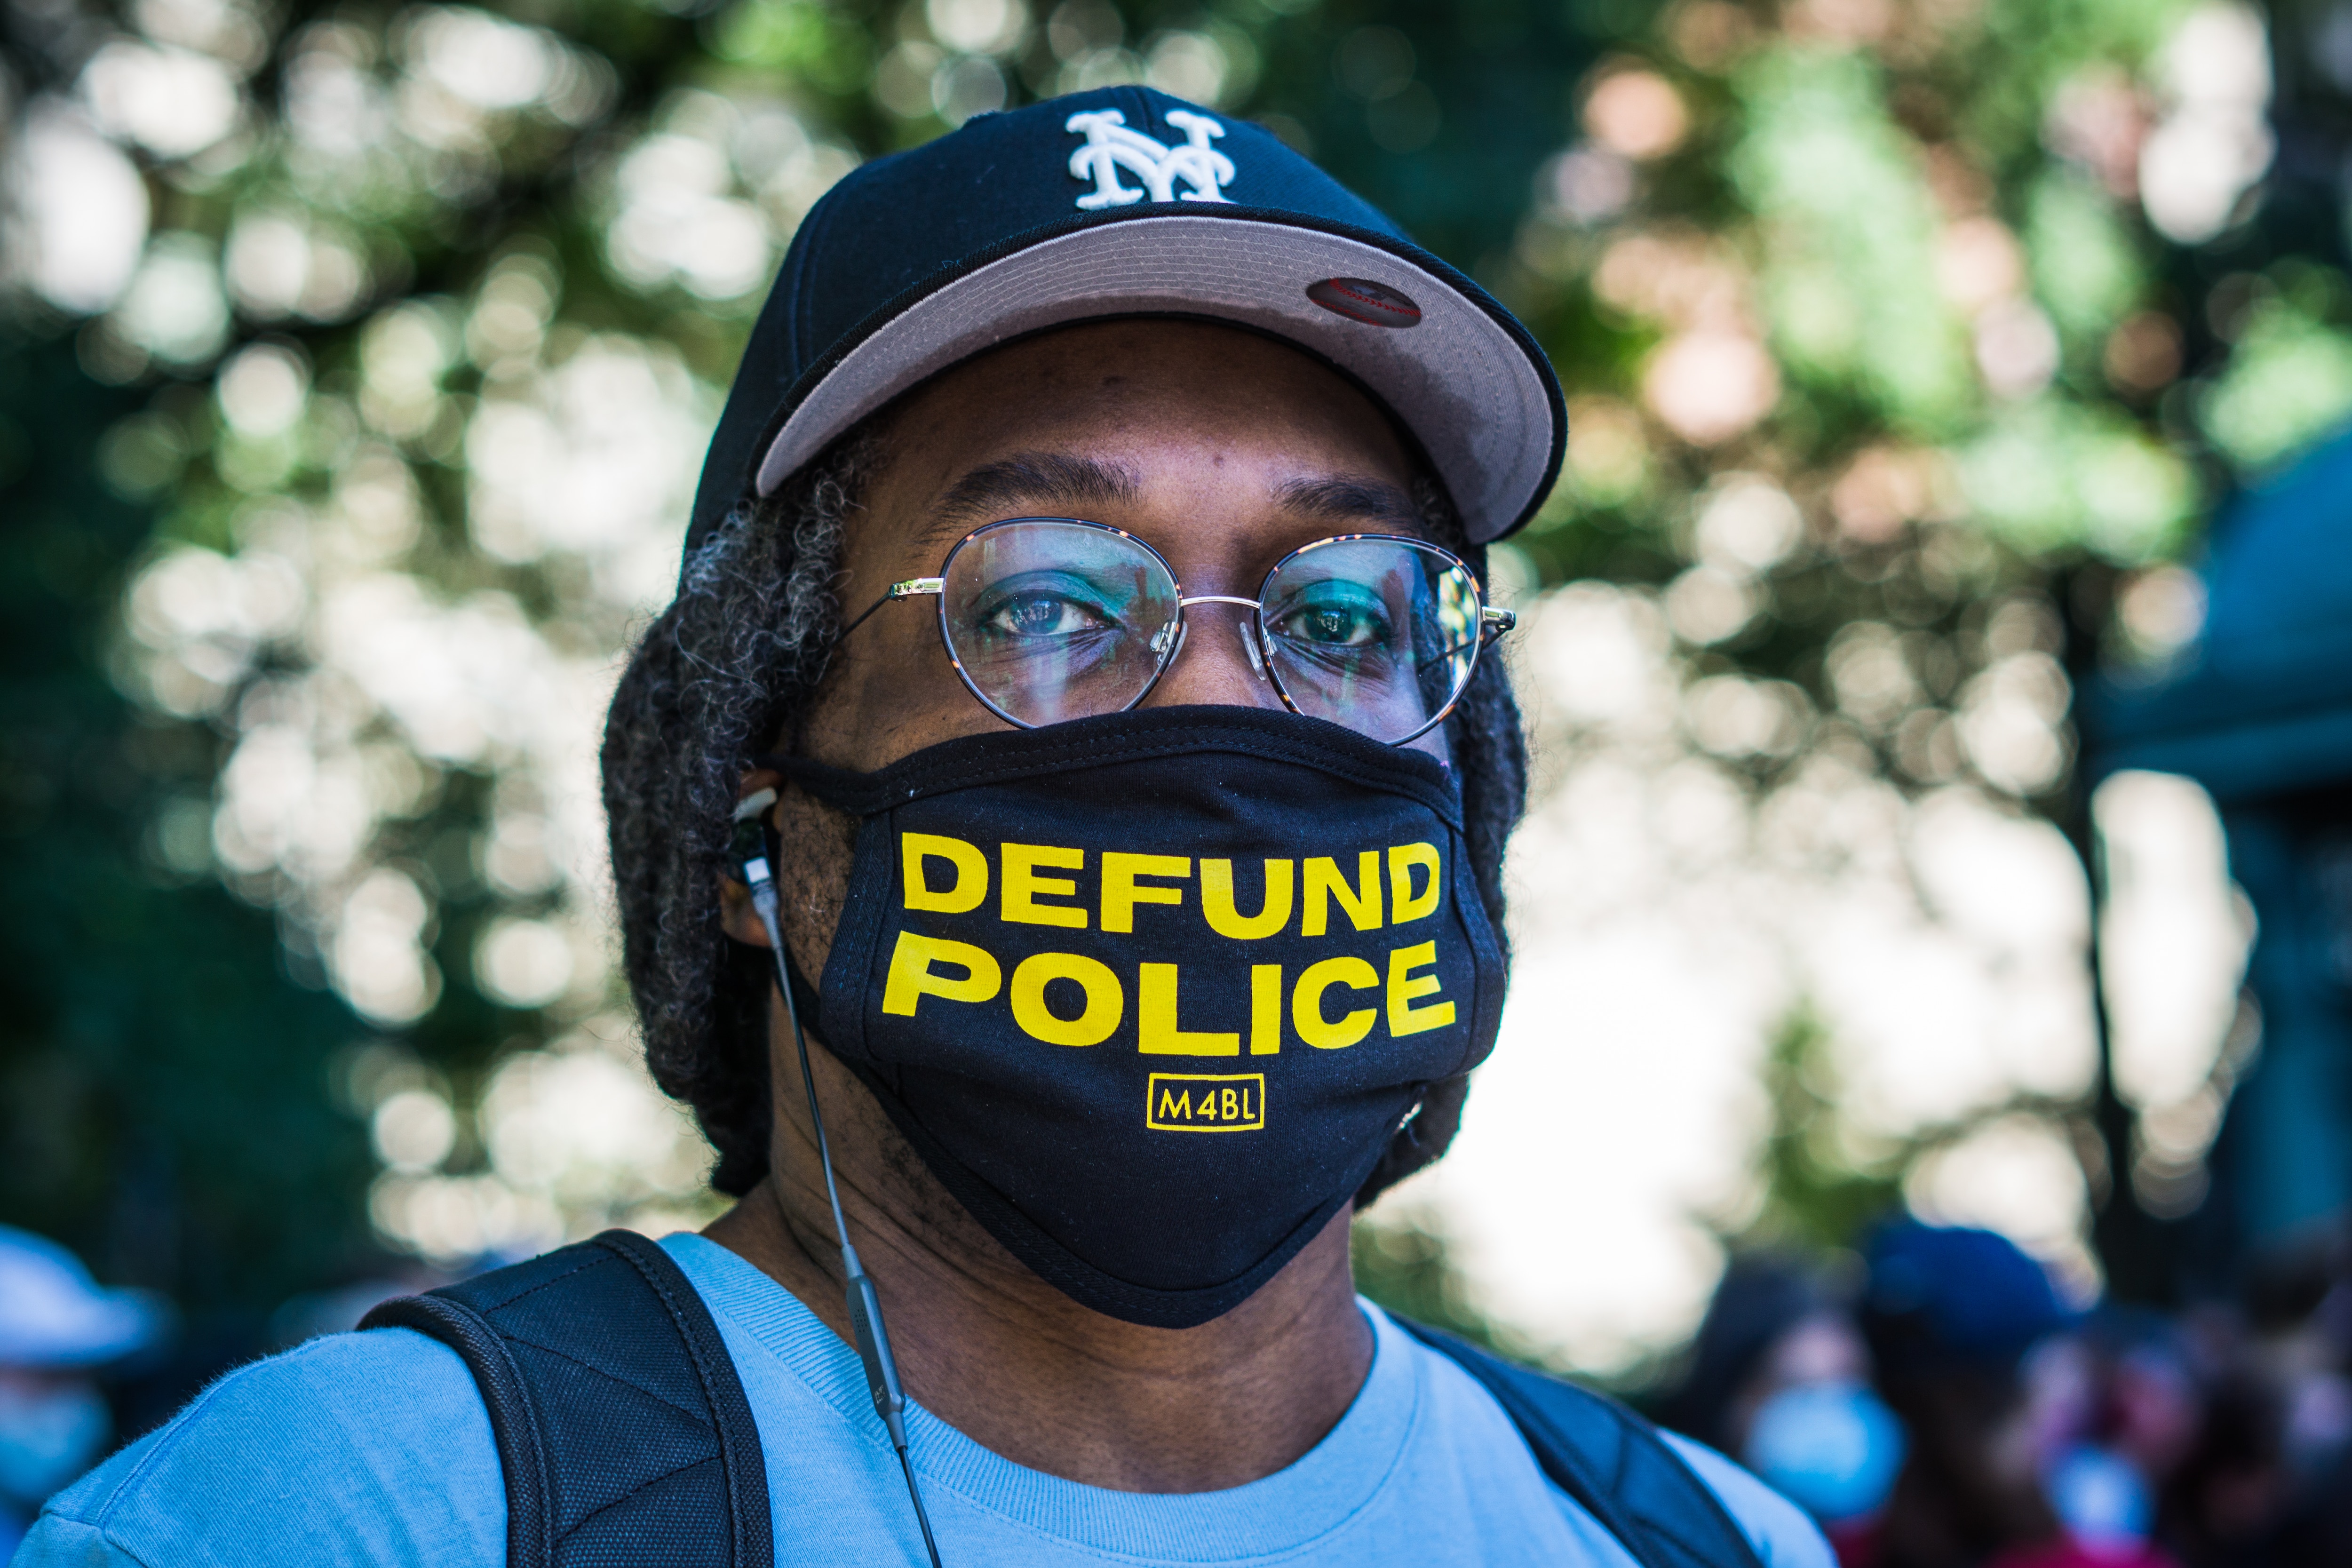 New York City Workers for Justice hold a protest calling for the city's administration to hold police officers accountable for brutality and racial profiling.